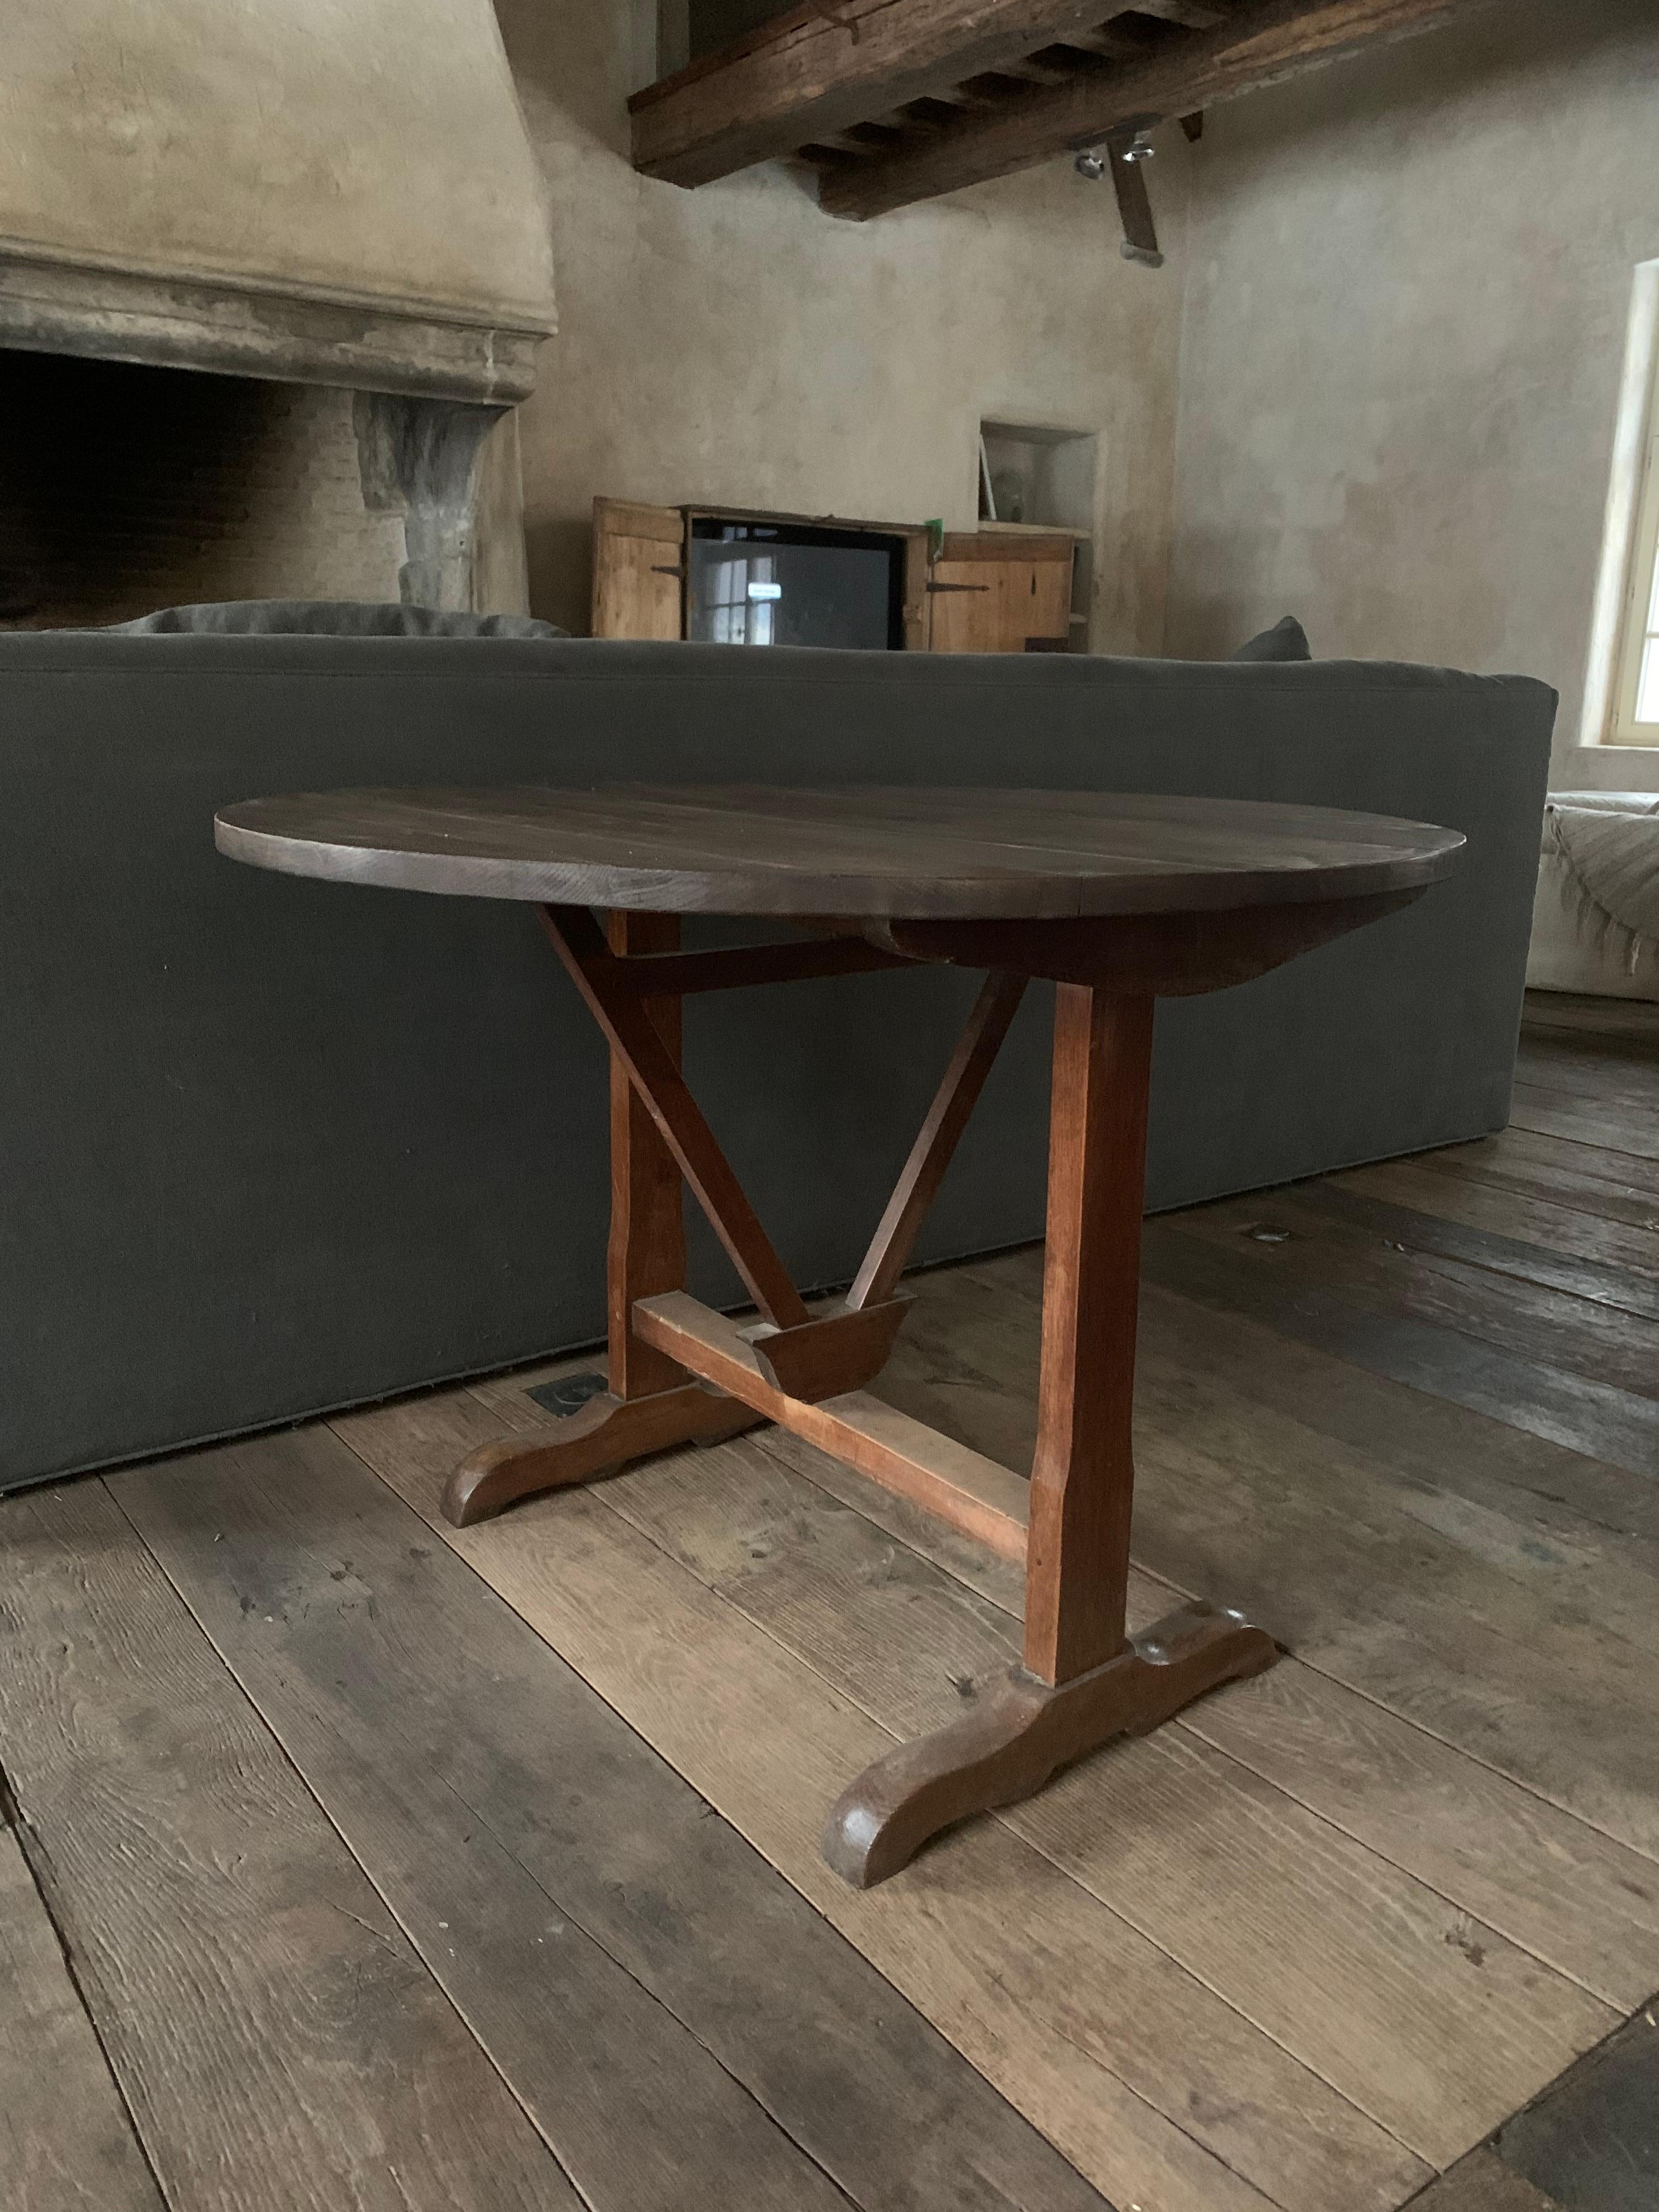 A good 19th century French Winetable. The oak top folds on the elm base.
These Vigneron tables were and are used on the French countryside as occasional tables in winecellars and on the field. Often made by farmers in the wintertime they are